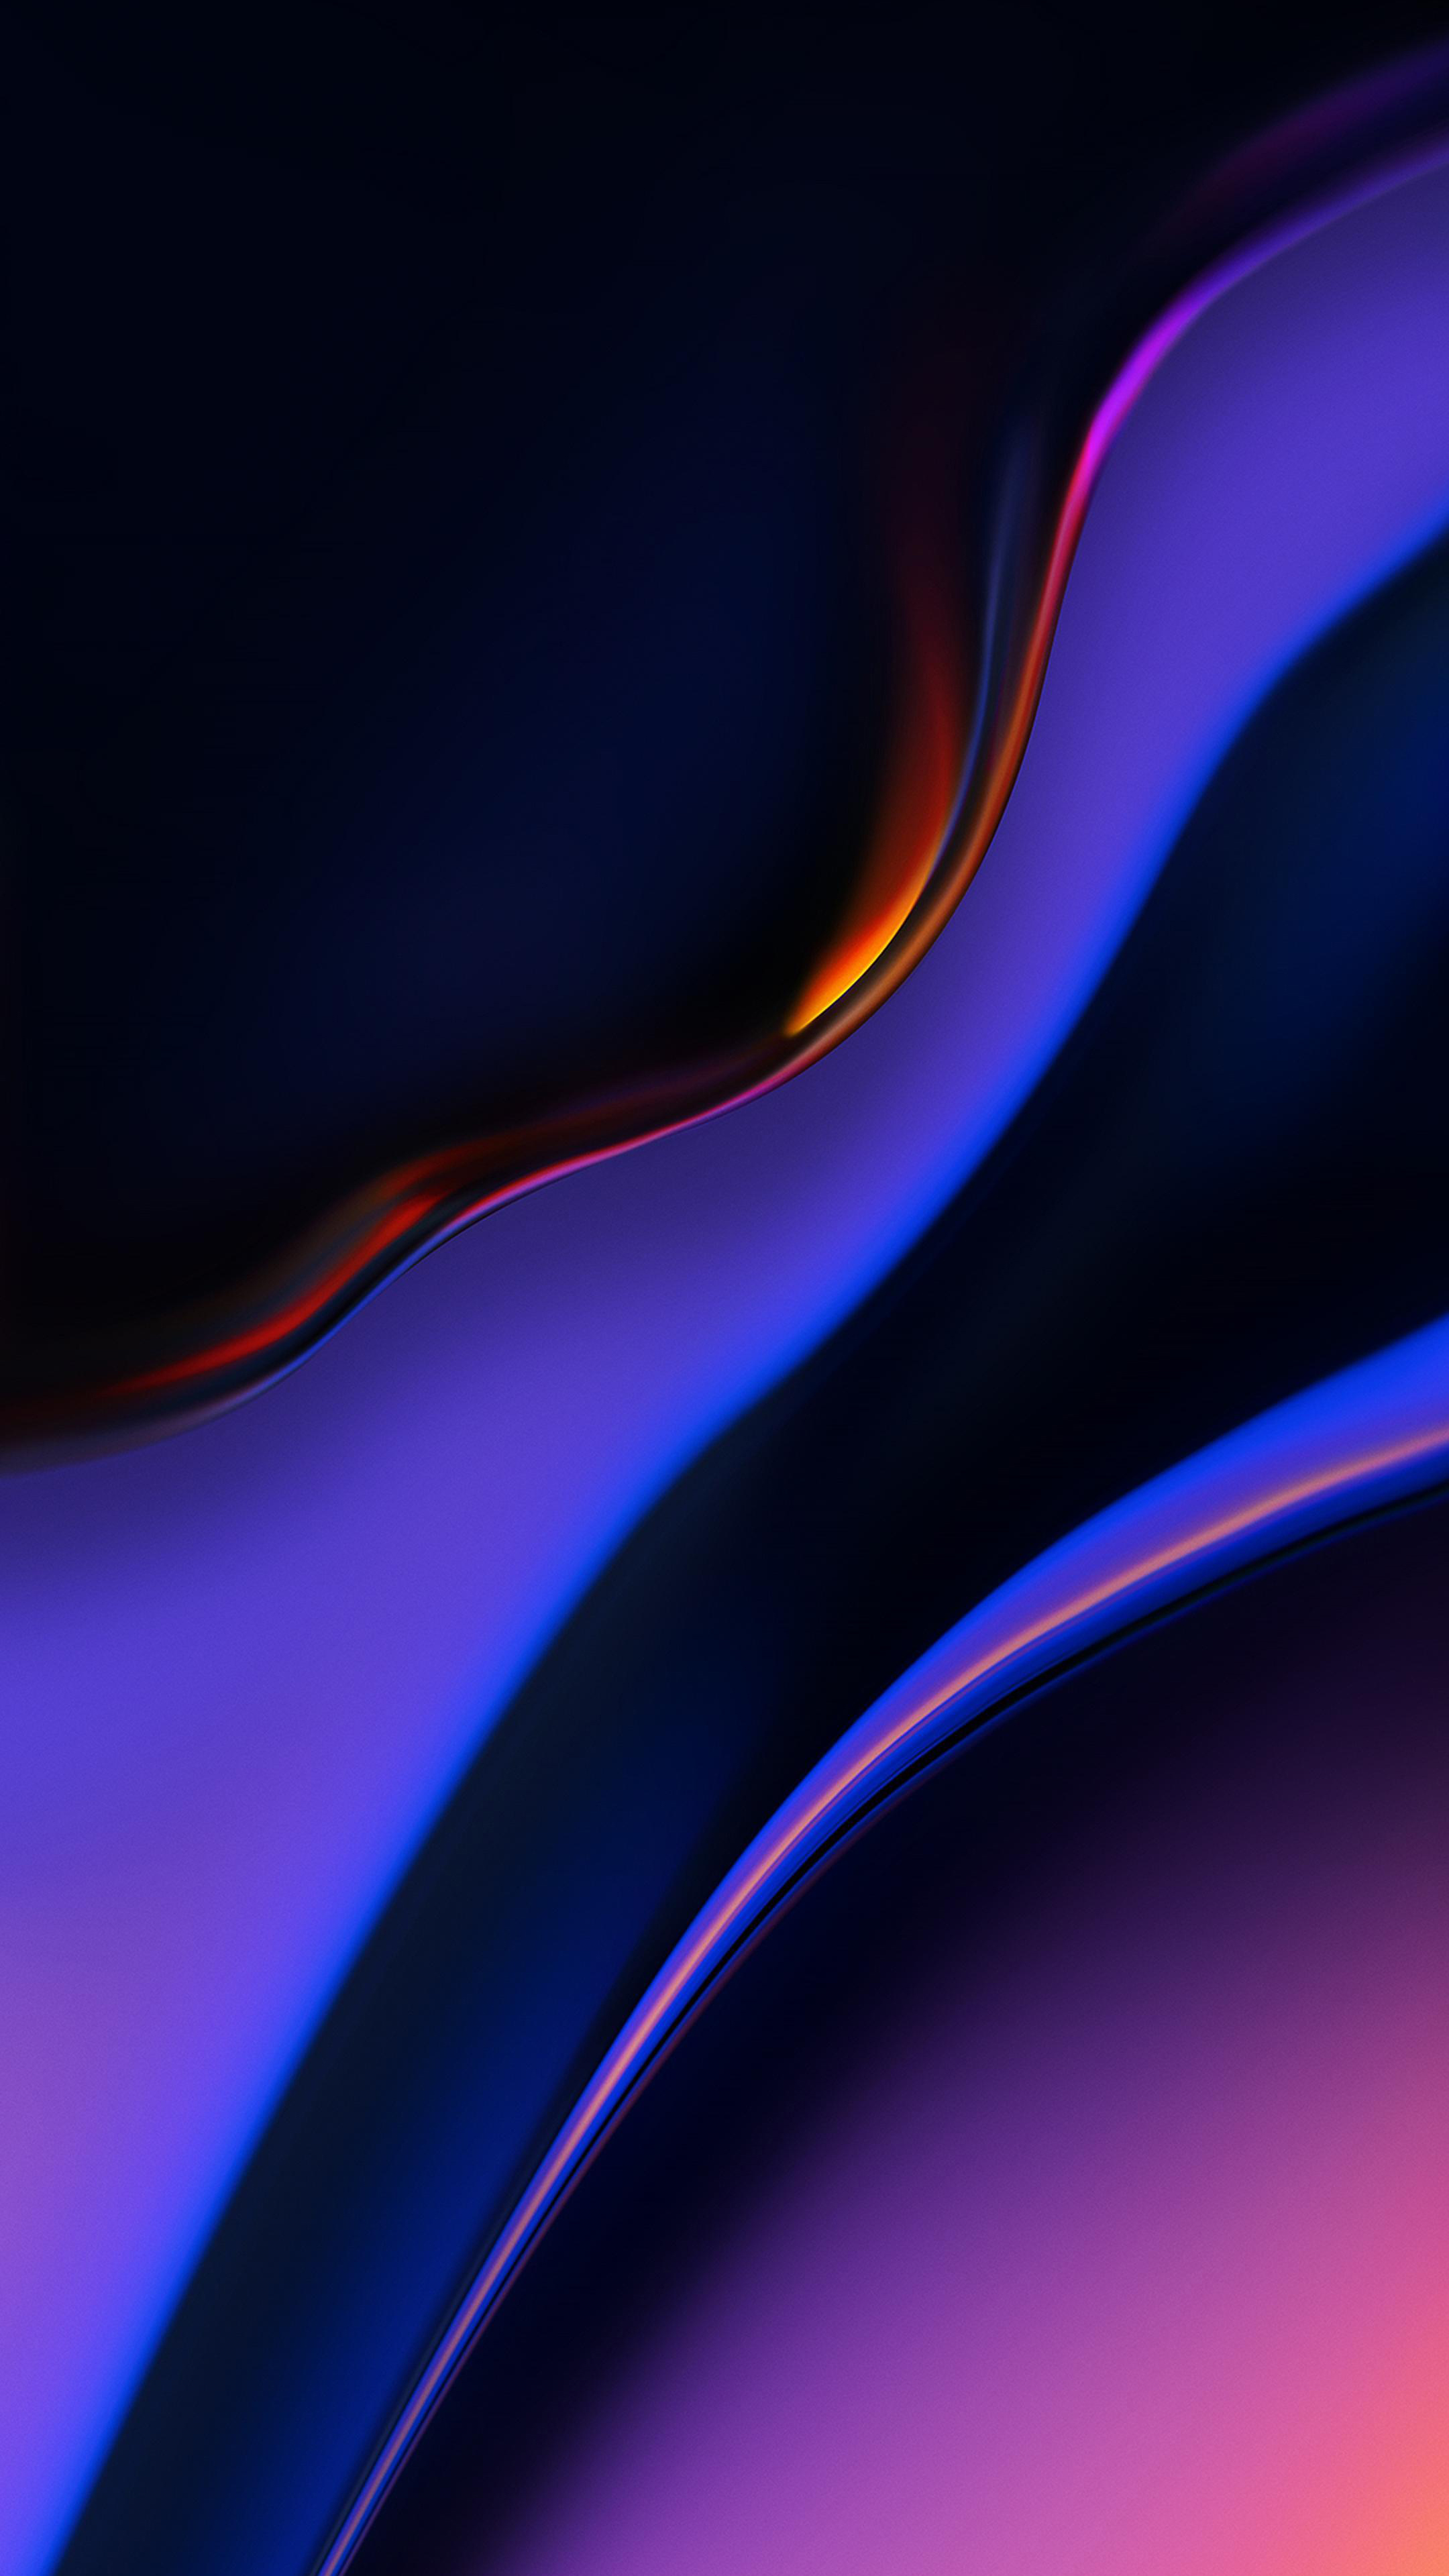 4k Amoled Wallpapers Free Download 